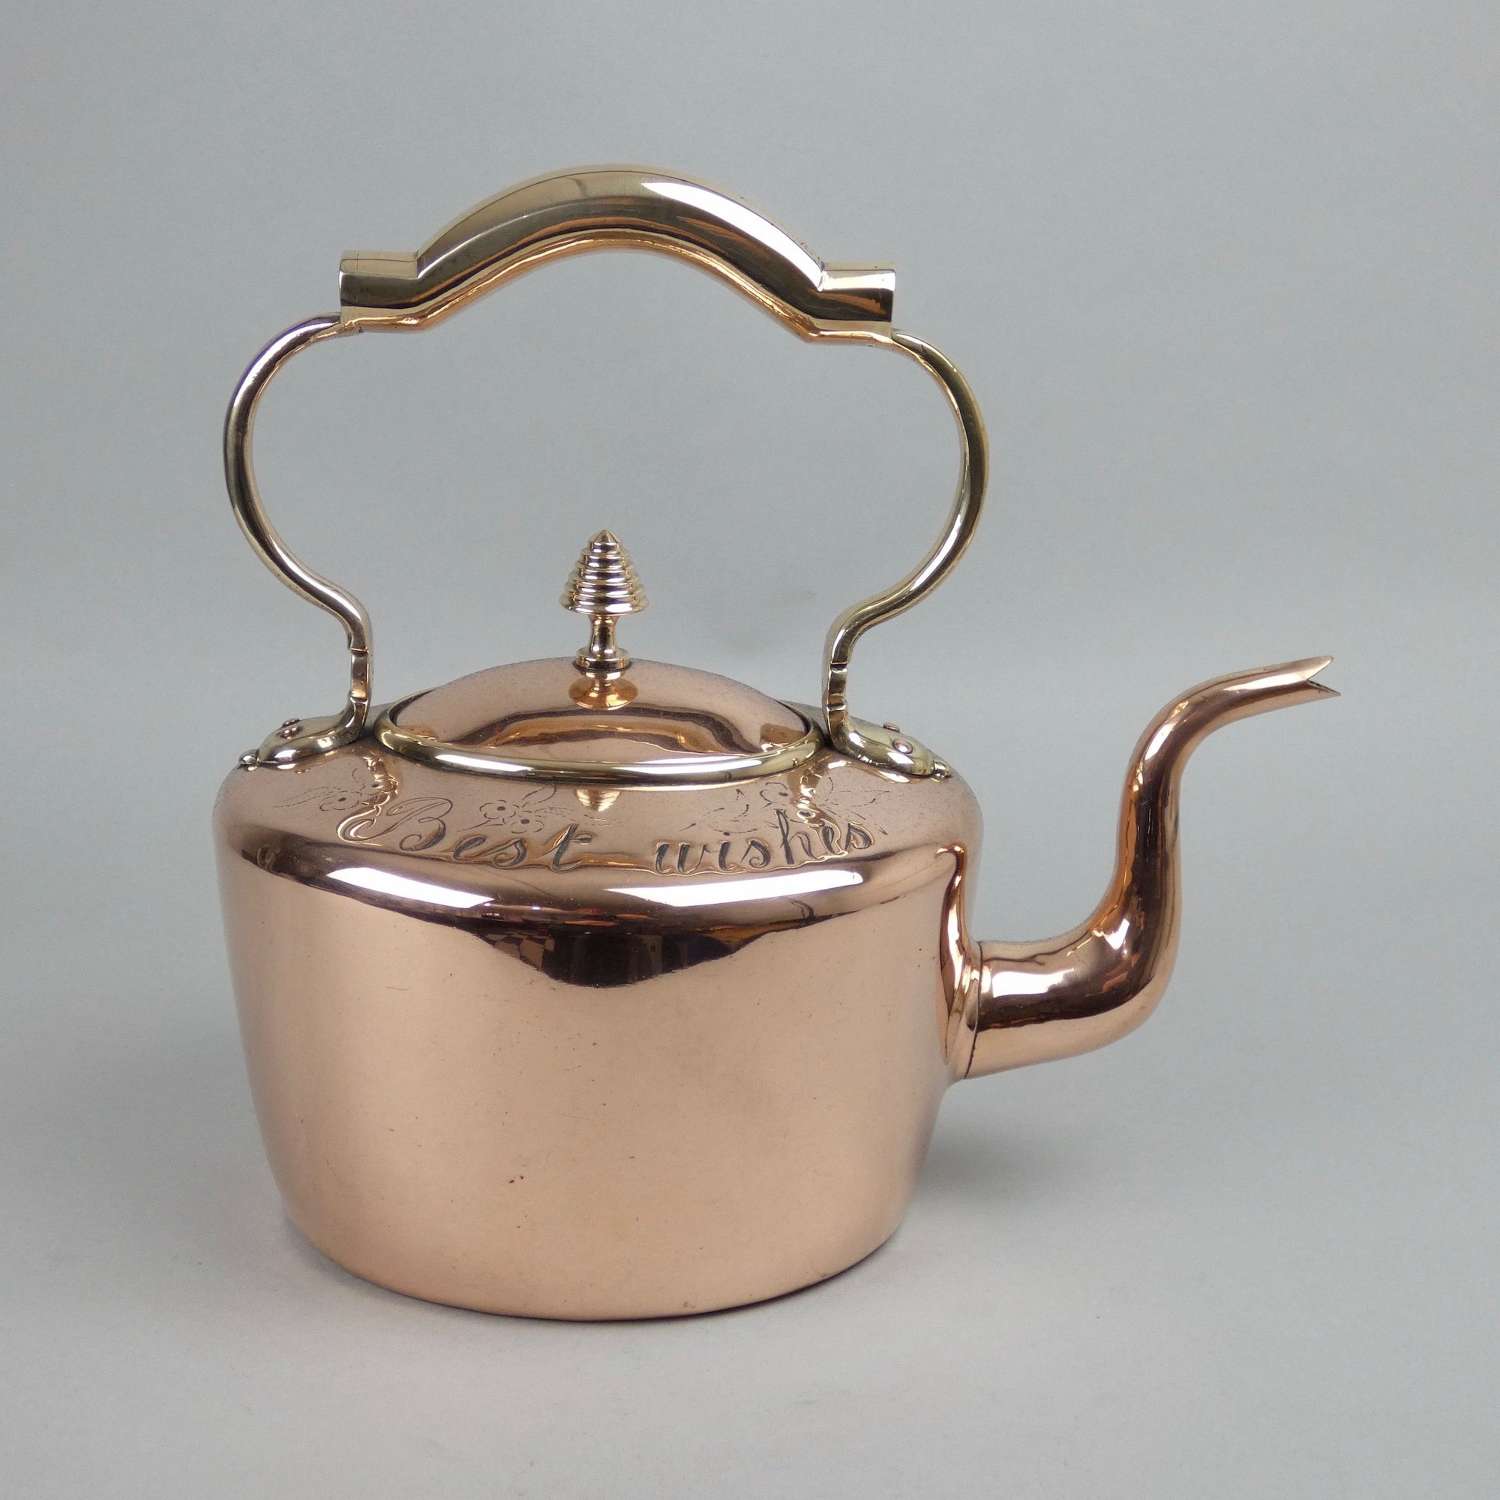 'Best wishes' copper kettle